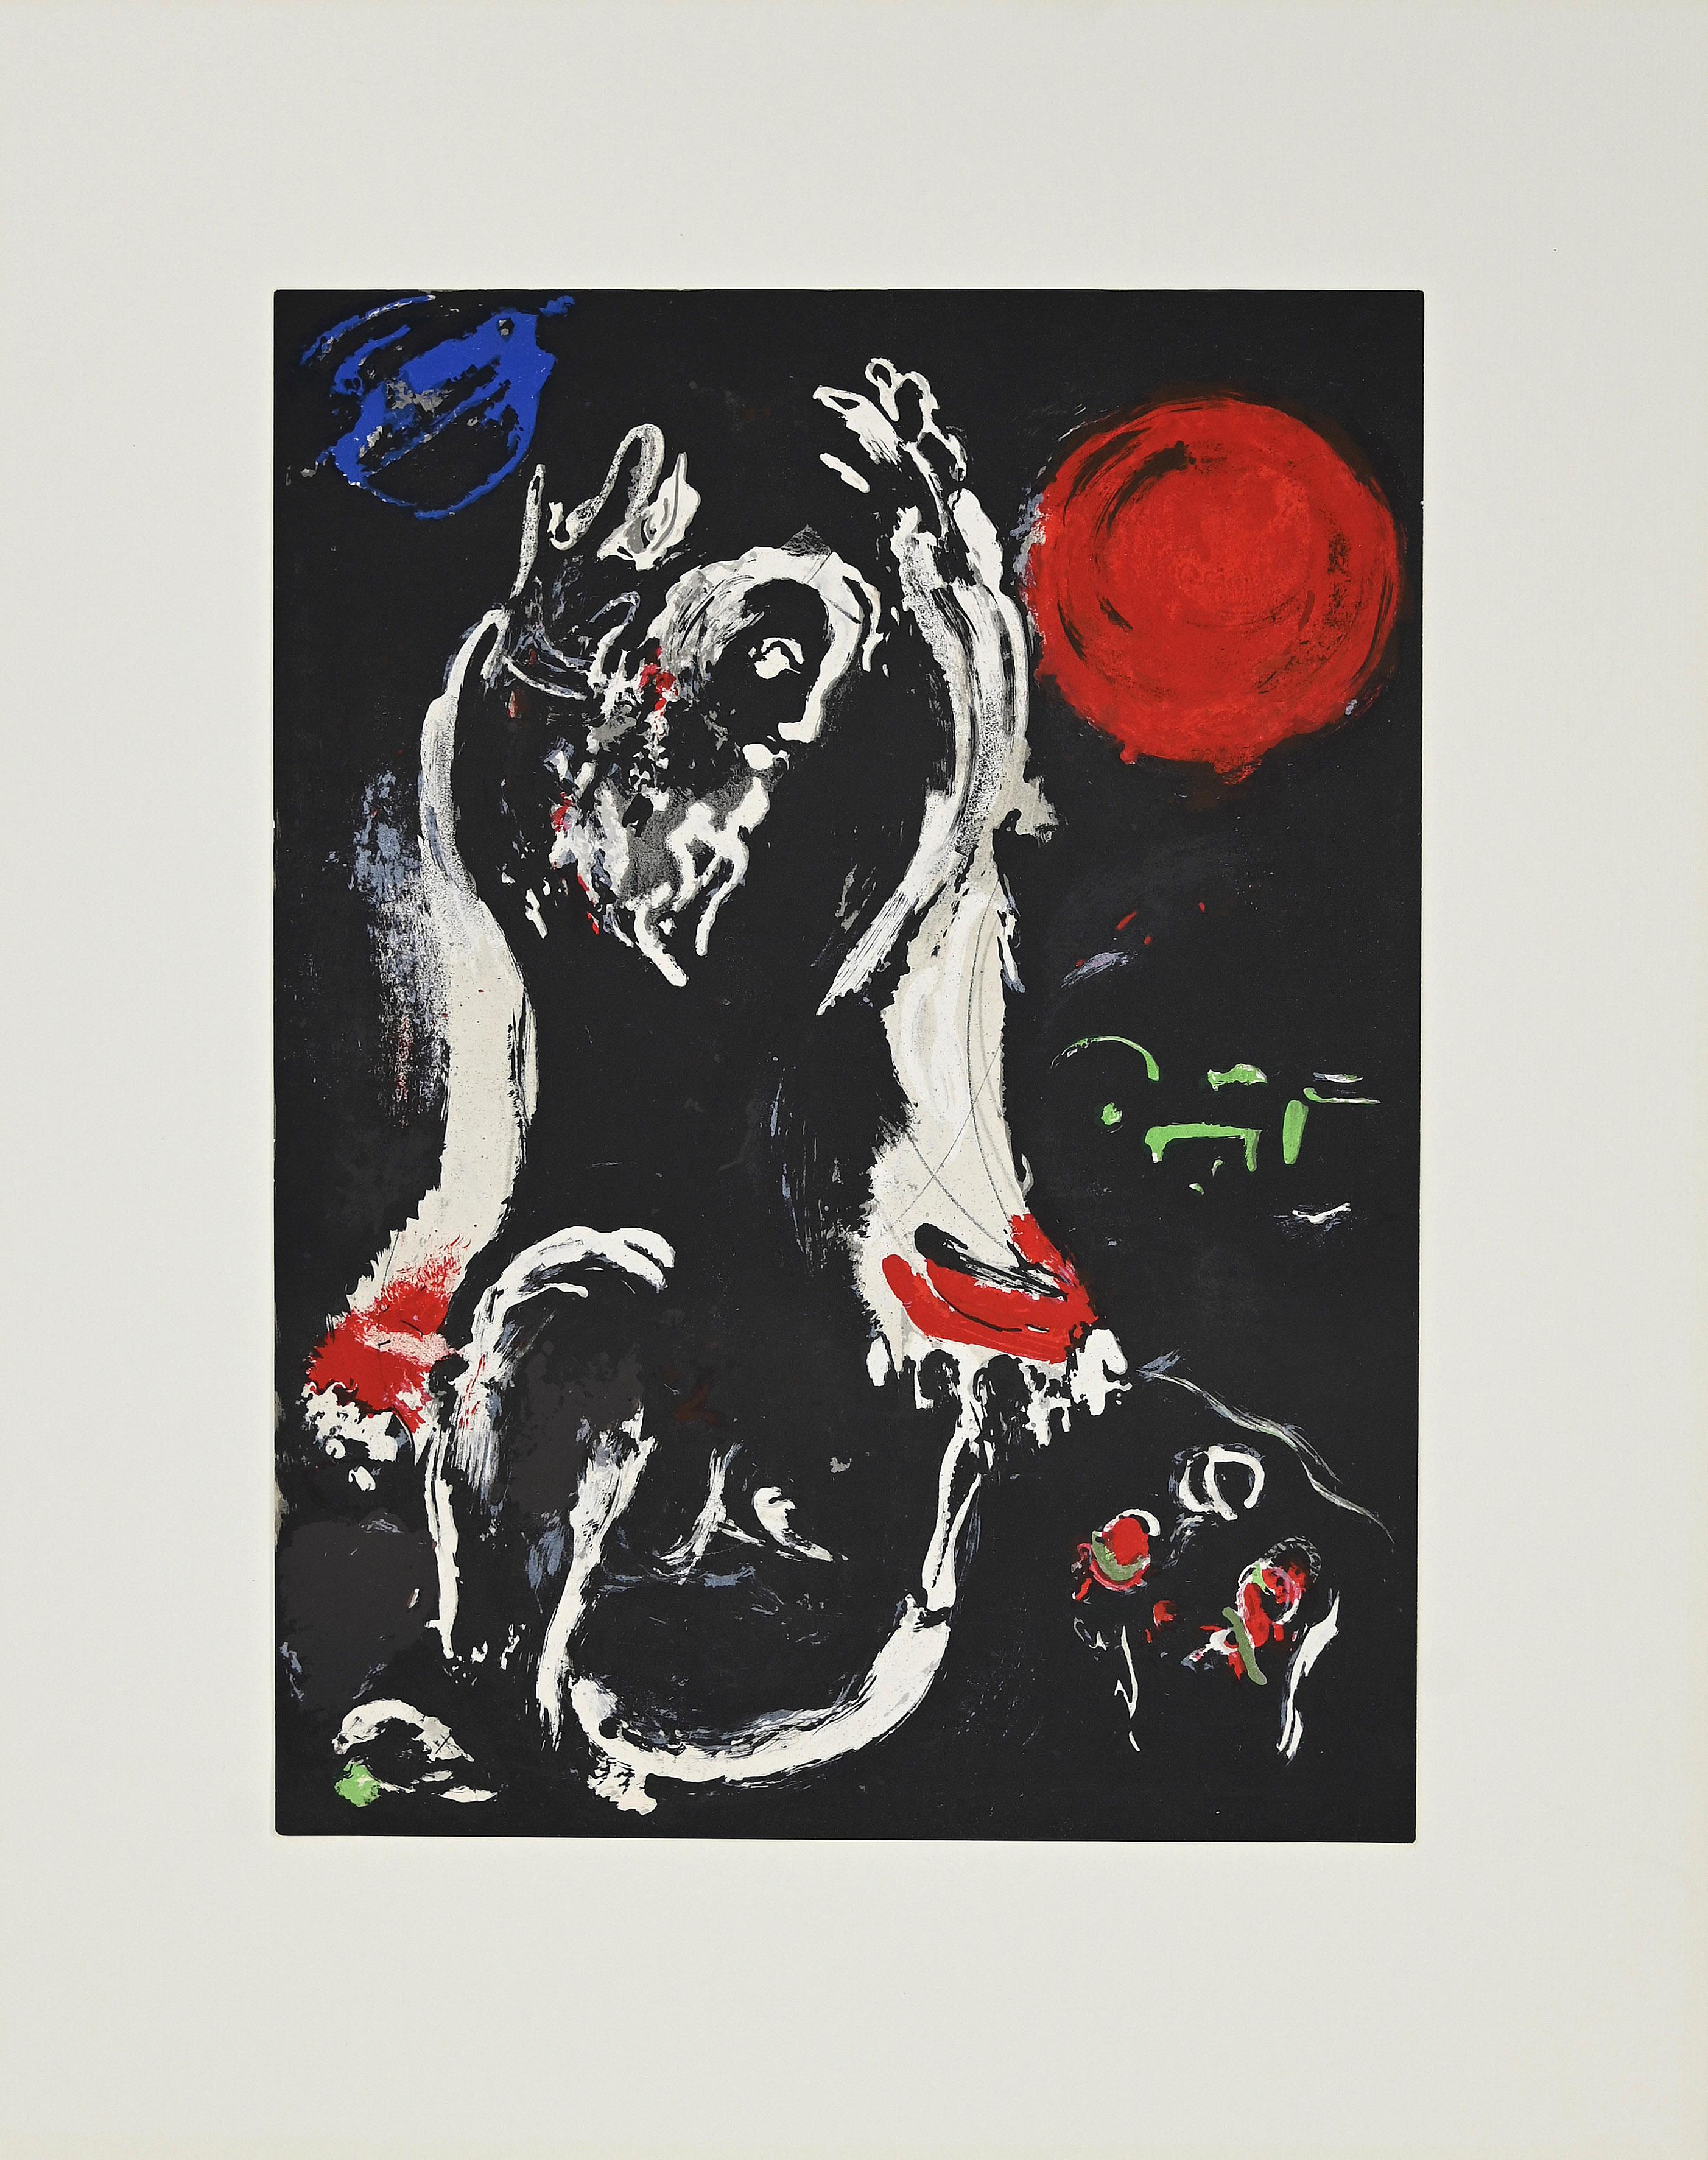 Isaiah - Original Lithograph by M. Chagall - 1956 - Print by Marc Chagall